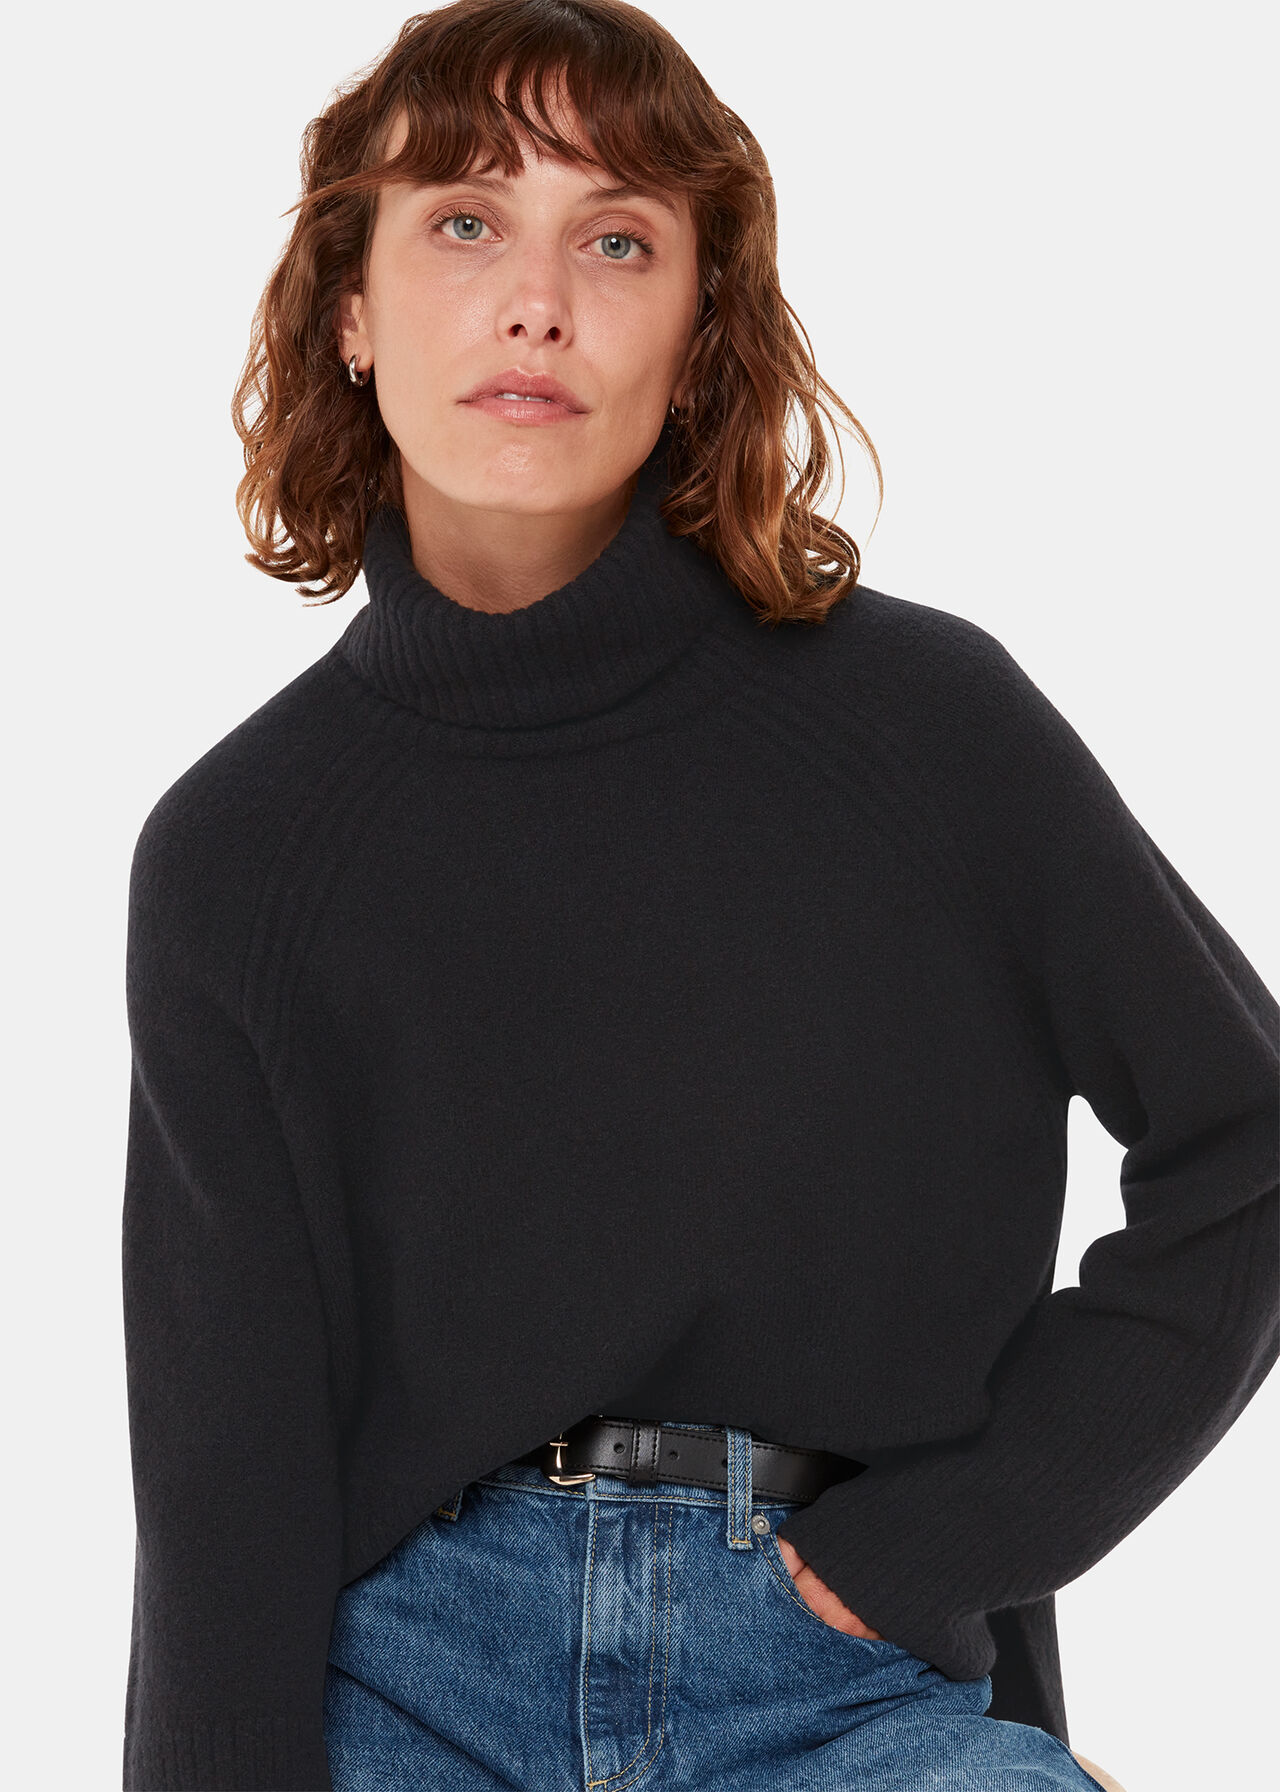 Shop the Black Ribbed Roll Neck Jumper at Whistles |